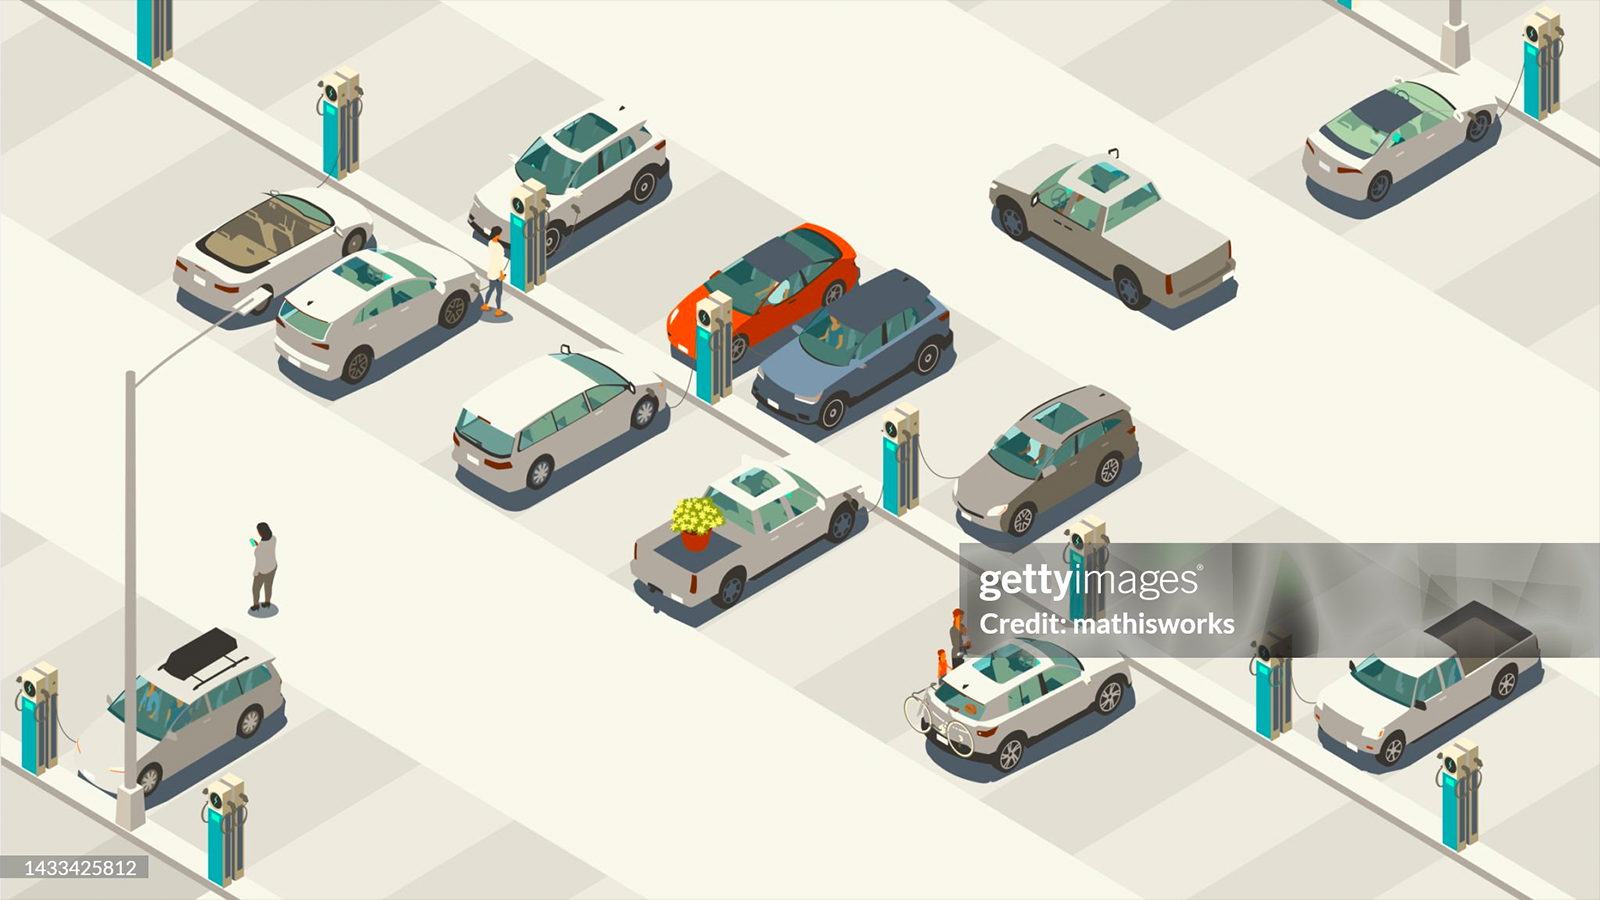 An illustration sample includes a lot filled with electric vehicles